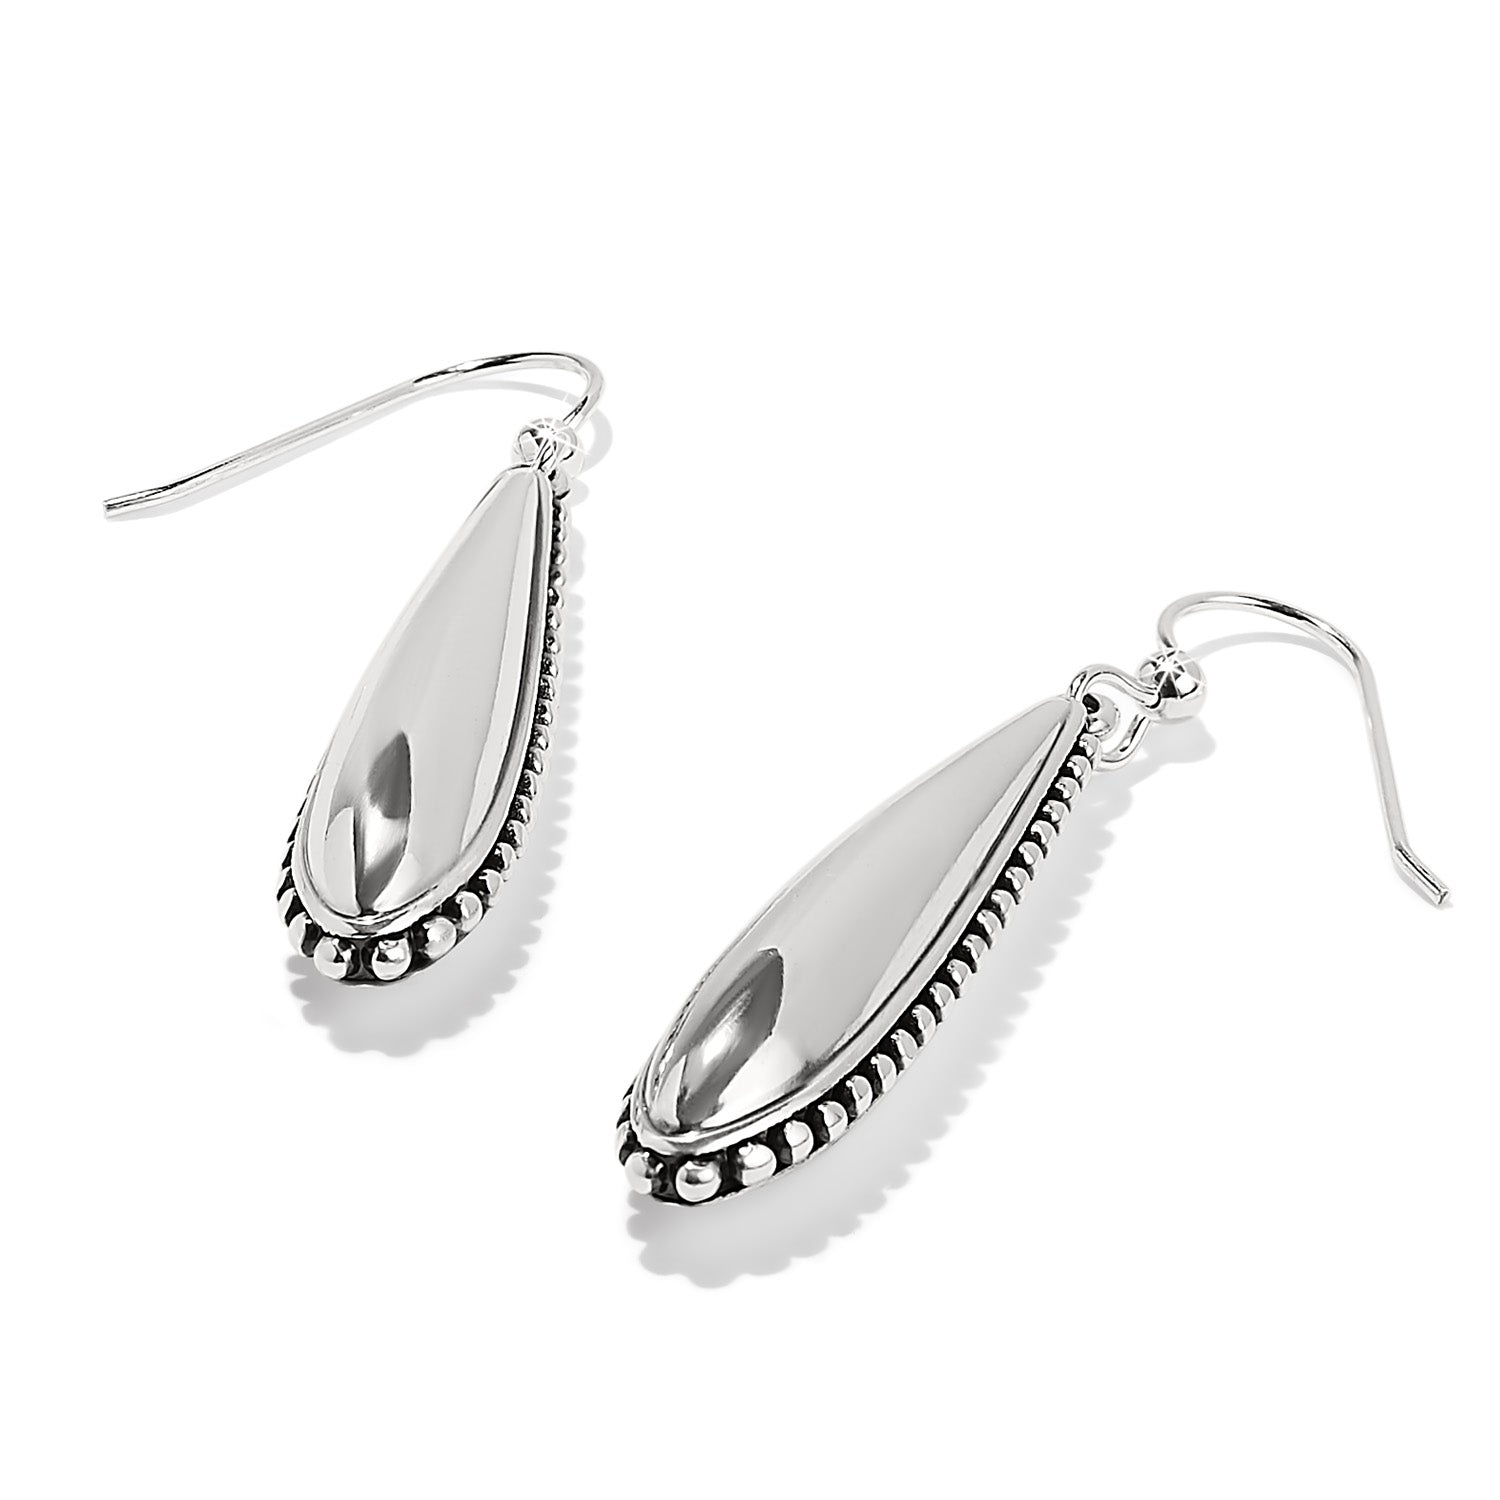 Pretty Tough Small Droplet French Wire Earrings